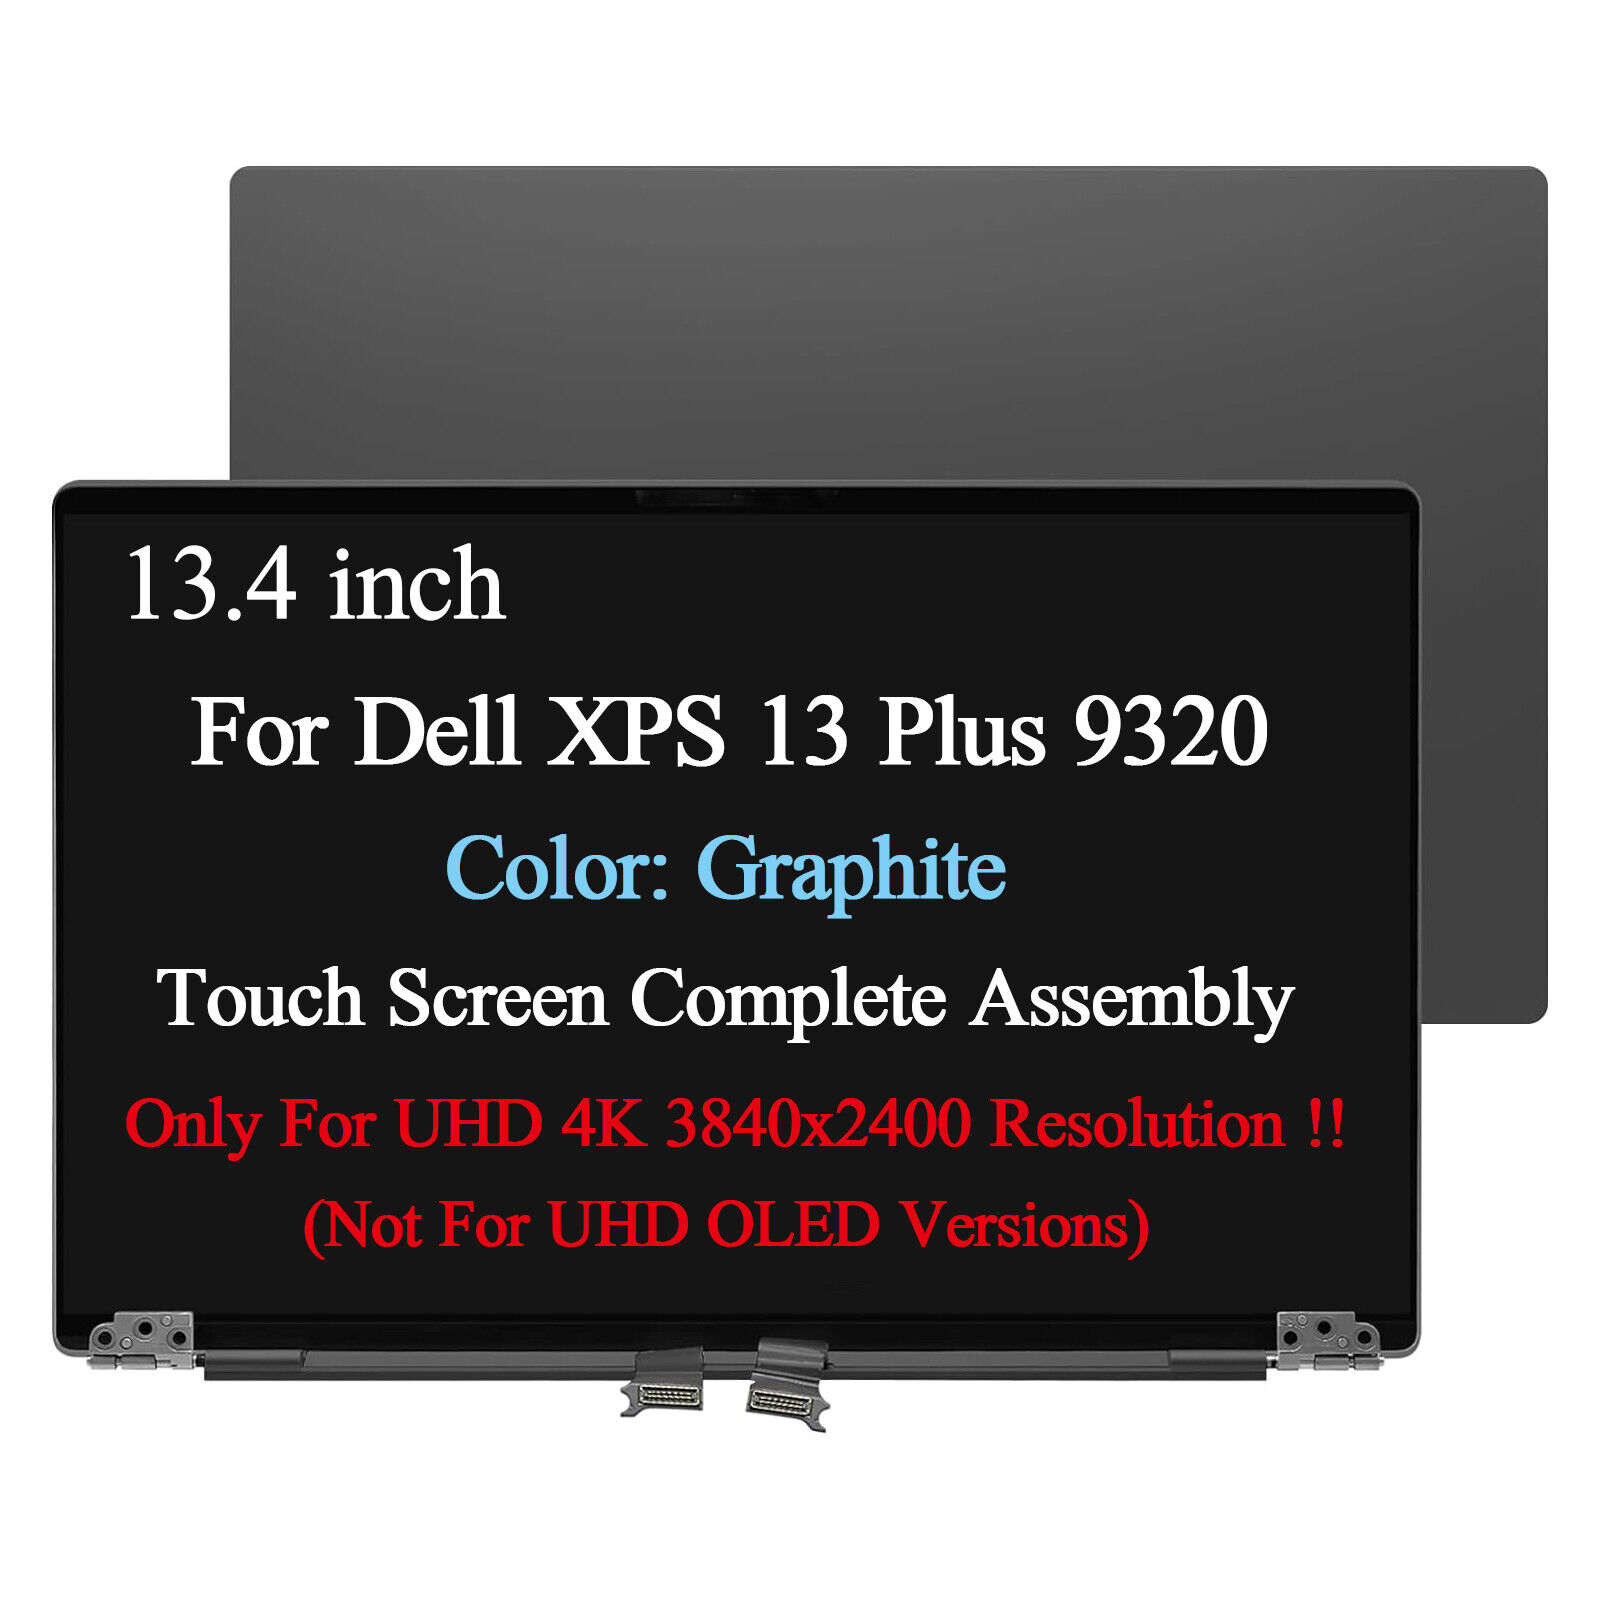 For Dell XPS 13 Plus 9320 LCD Touch Screen Complete Assembly 3840x2400 Graphite